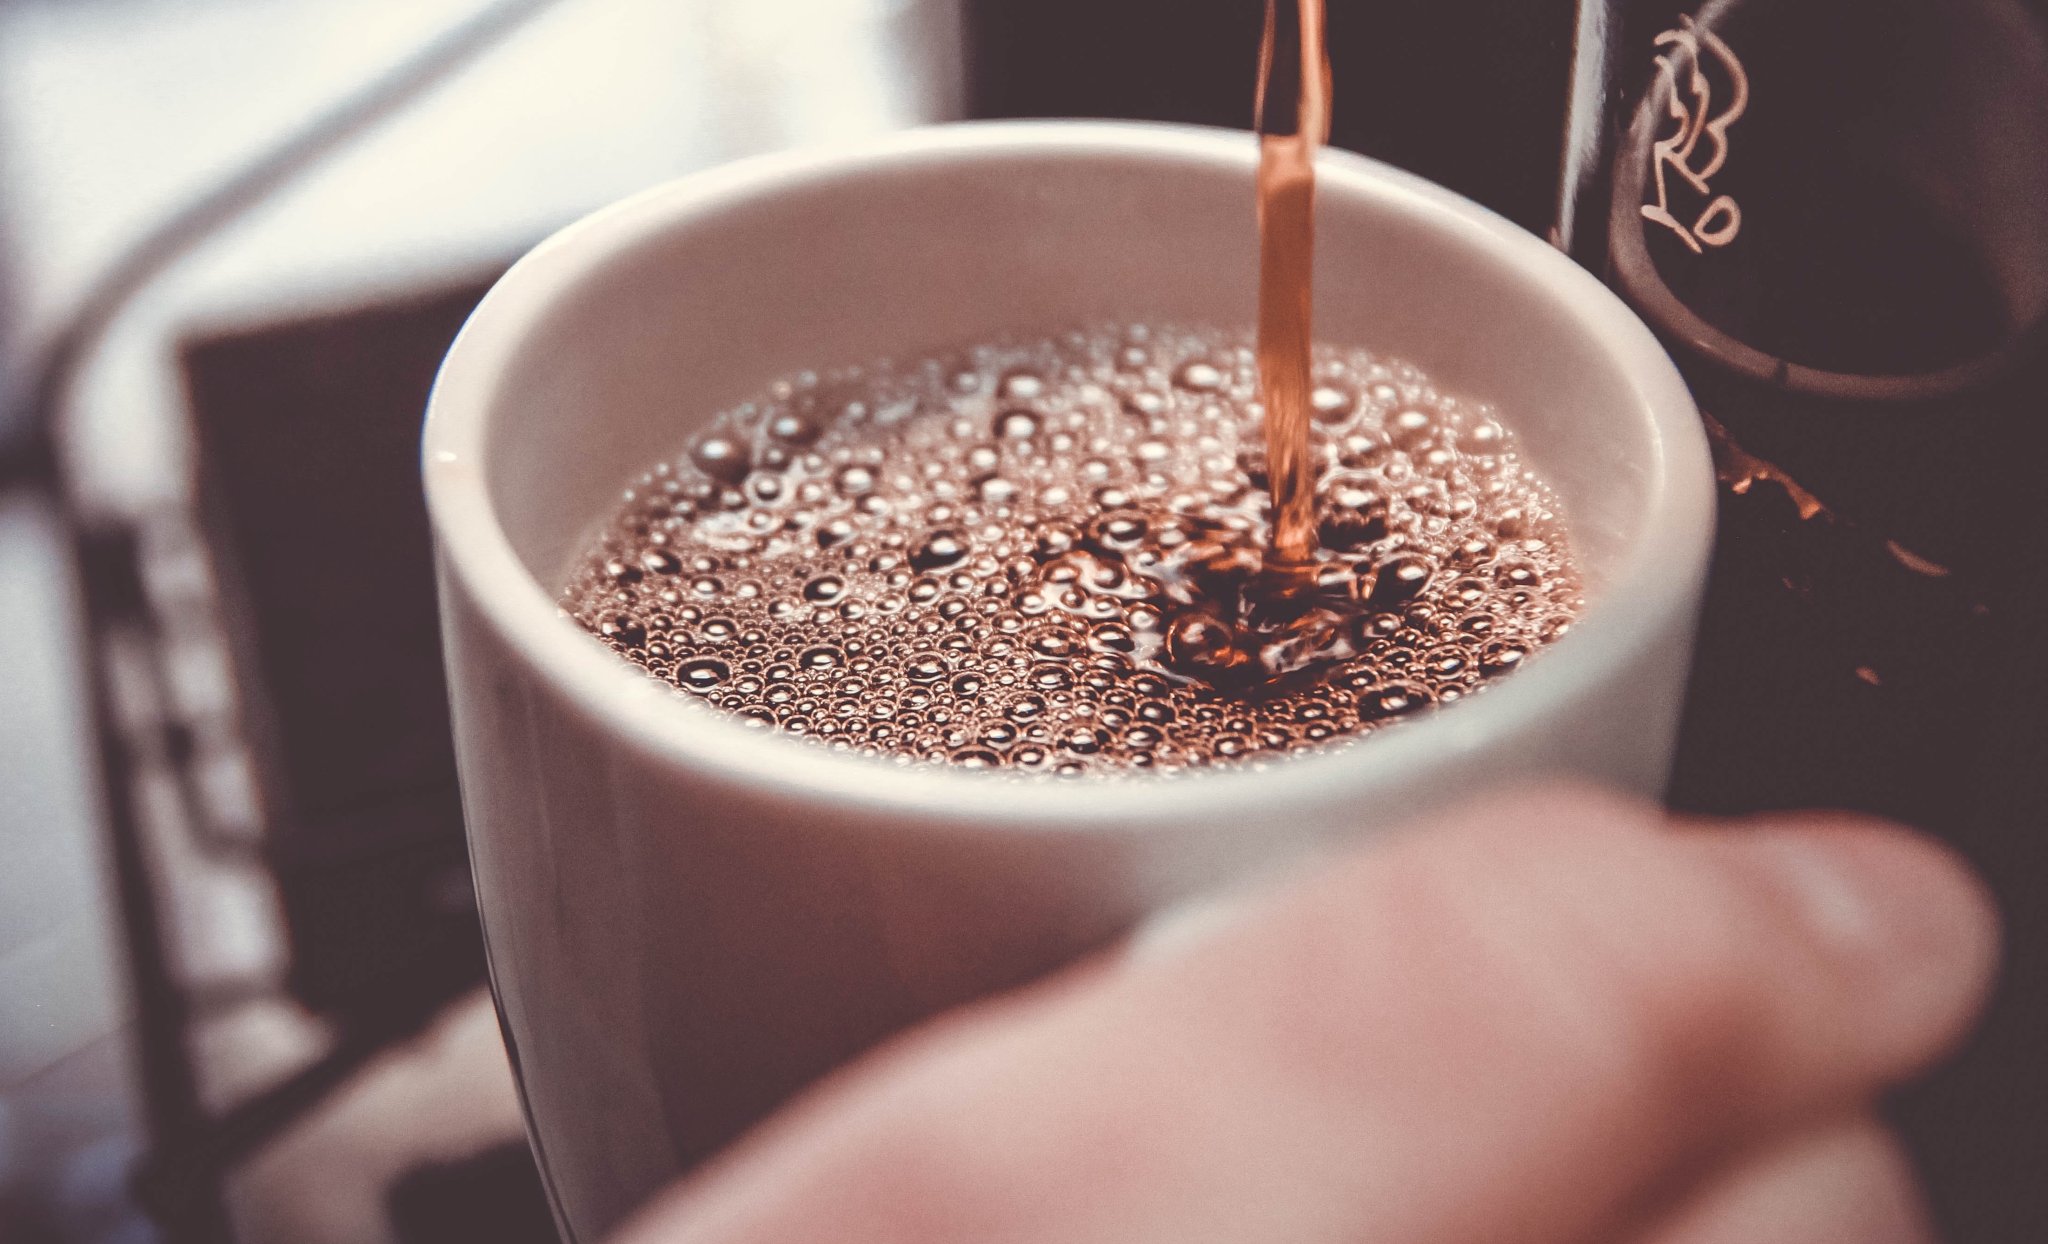 Study Determines Which Should Come First: Coffee or Breakfast